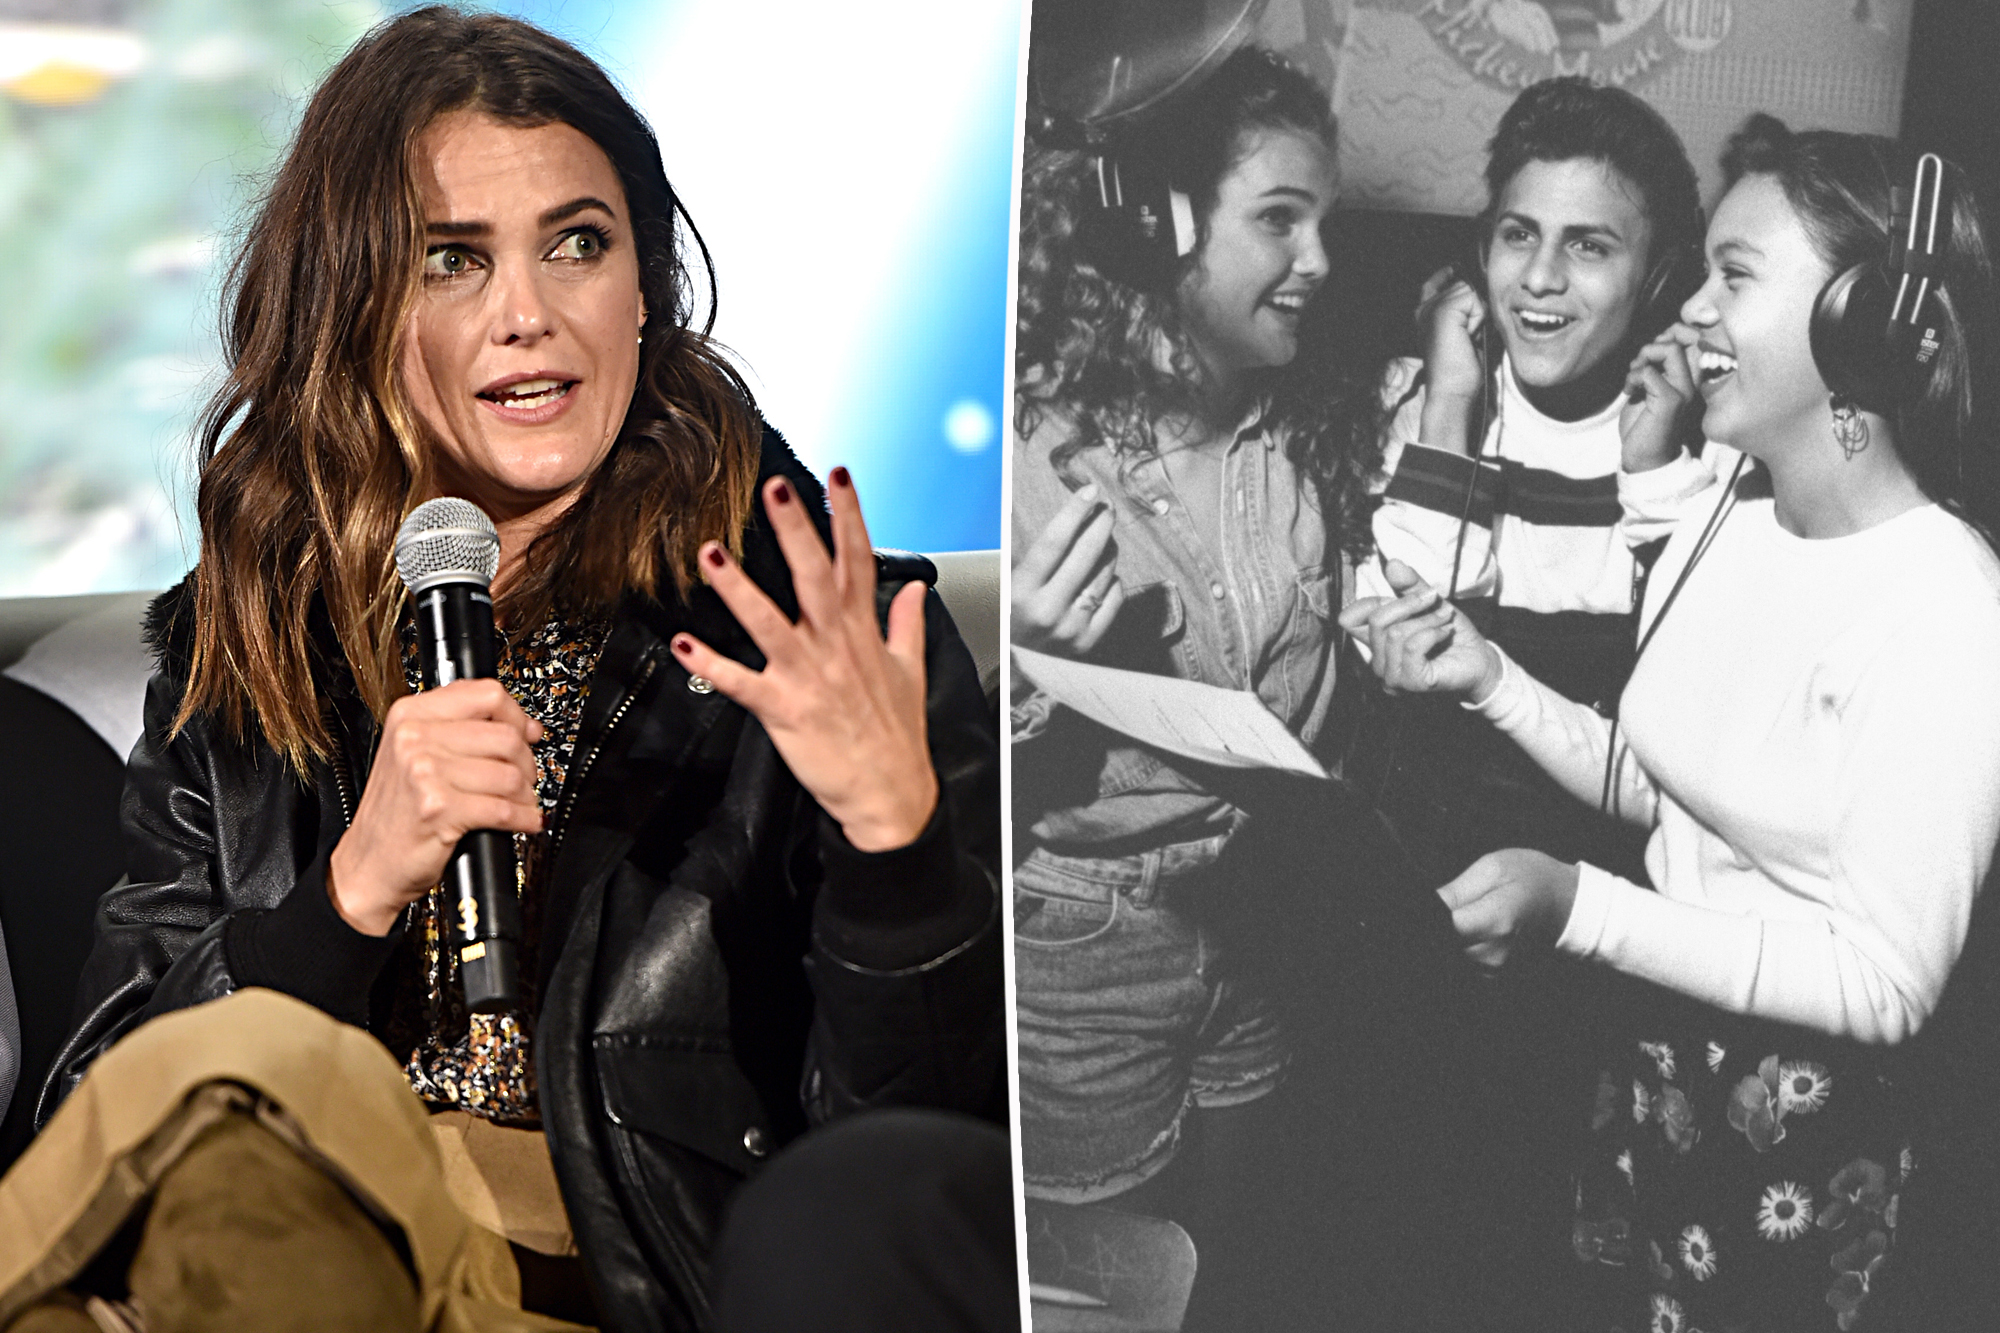 Keri Russell Spills the Tea on Mickey Mouse Club Drama! Find Out Why She Got Cut!